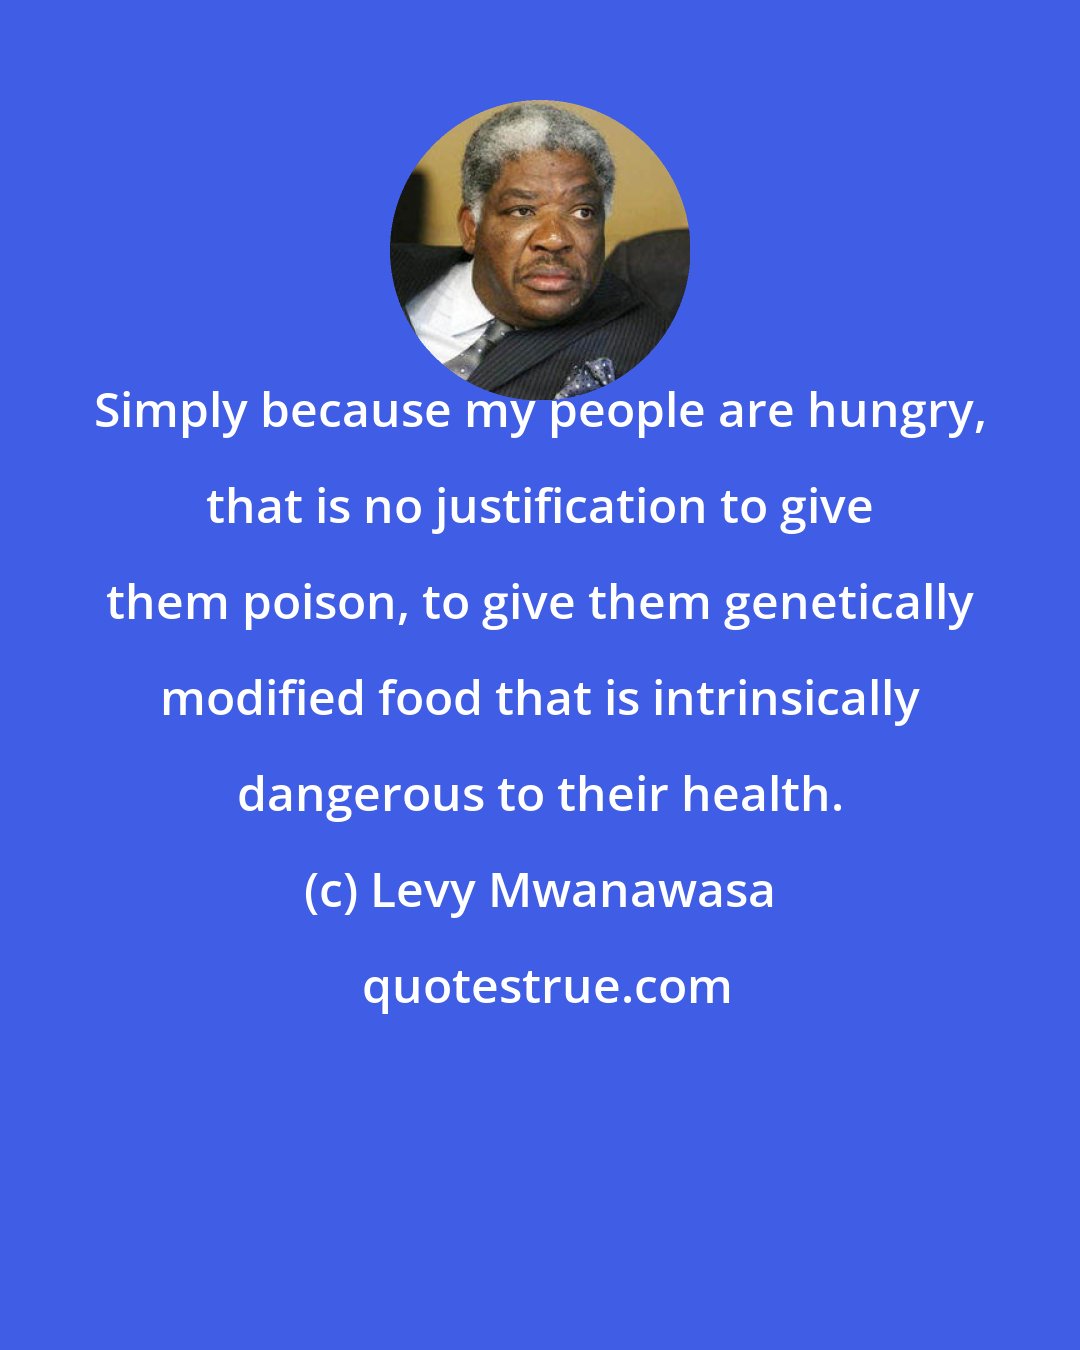 Levy Mwanawasa: Simply because my people are hungry, that is no justification to give them poison, to give them genetically modified food that is intrinsically dangerous to their health.